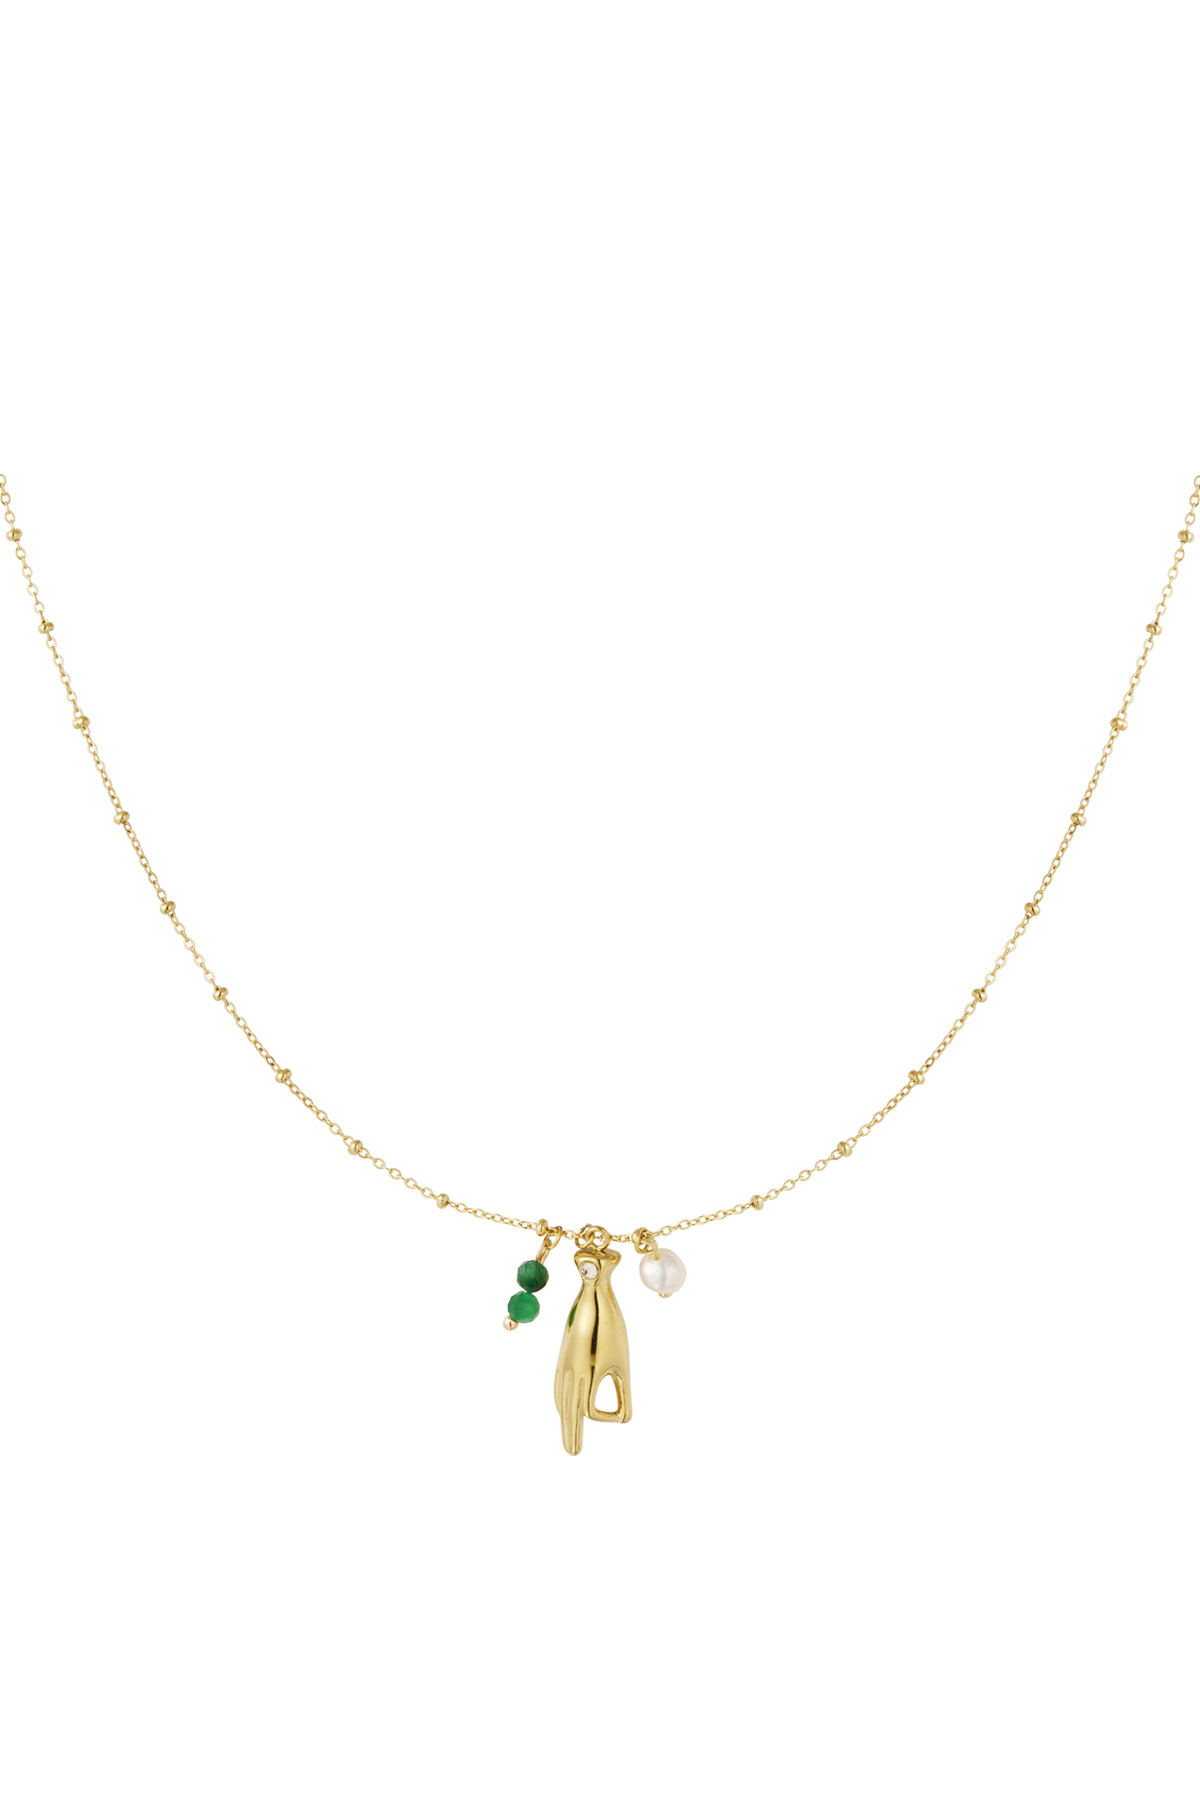 Necklace with open hand charm - green gold h5 